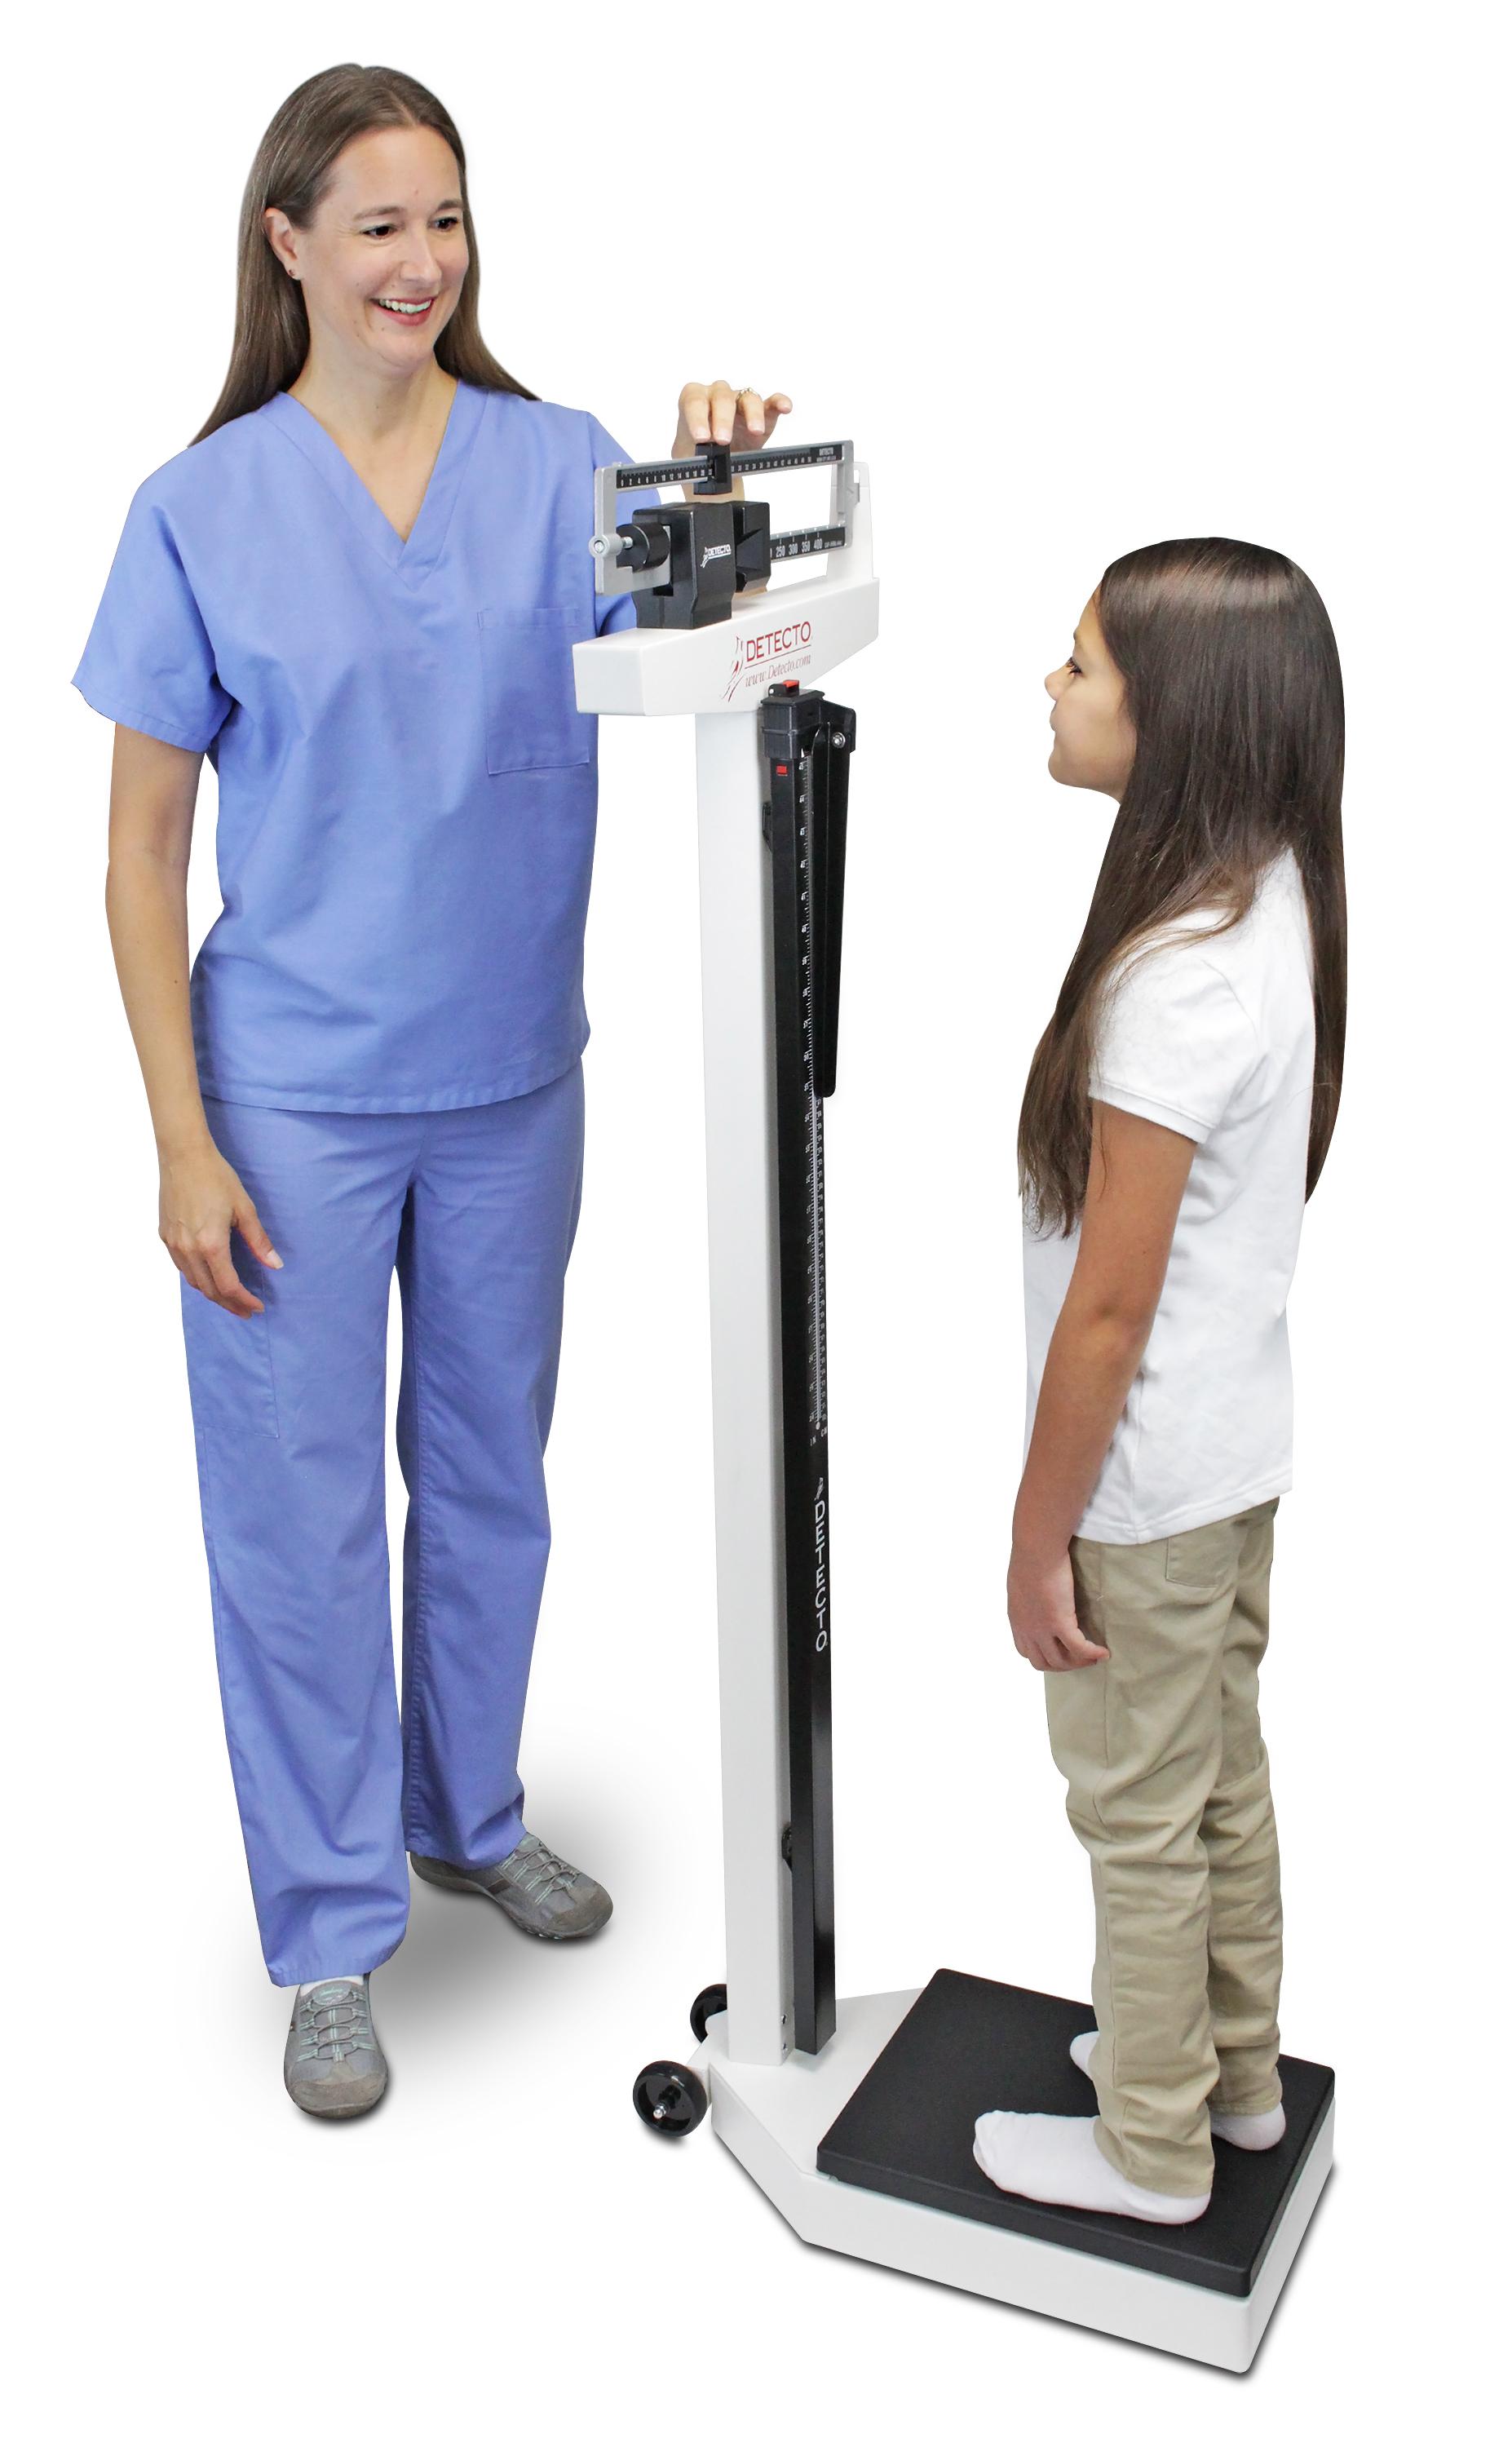 https://cardinalscale.com/themes/ee/site/default/asset/img/product/438-Nurse_Weighing_Girl.jpg